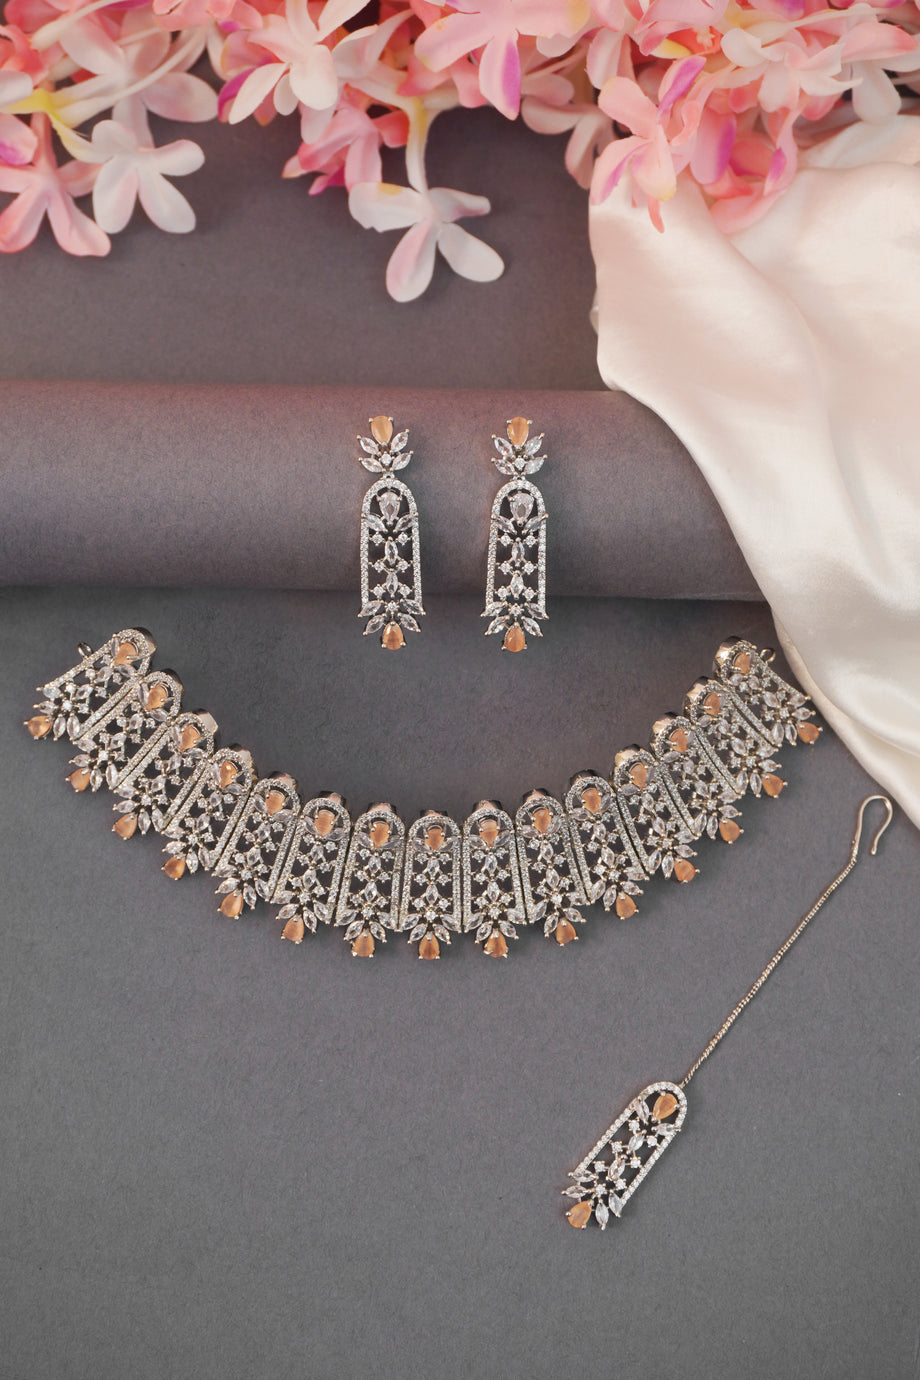 This designer Green Jewellery Set detailed with bridal set on Sale, Upto  45% OFF - New Arrivals